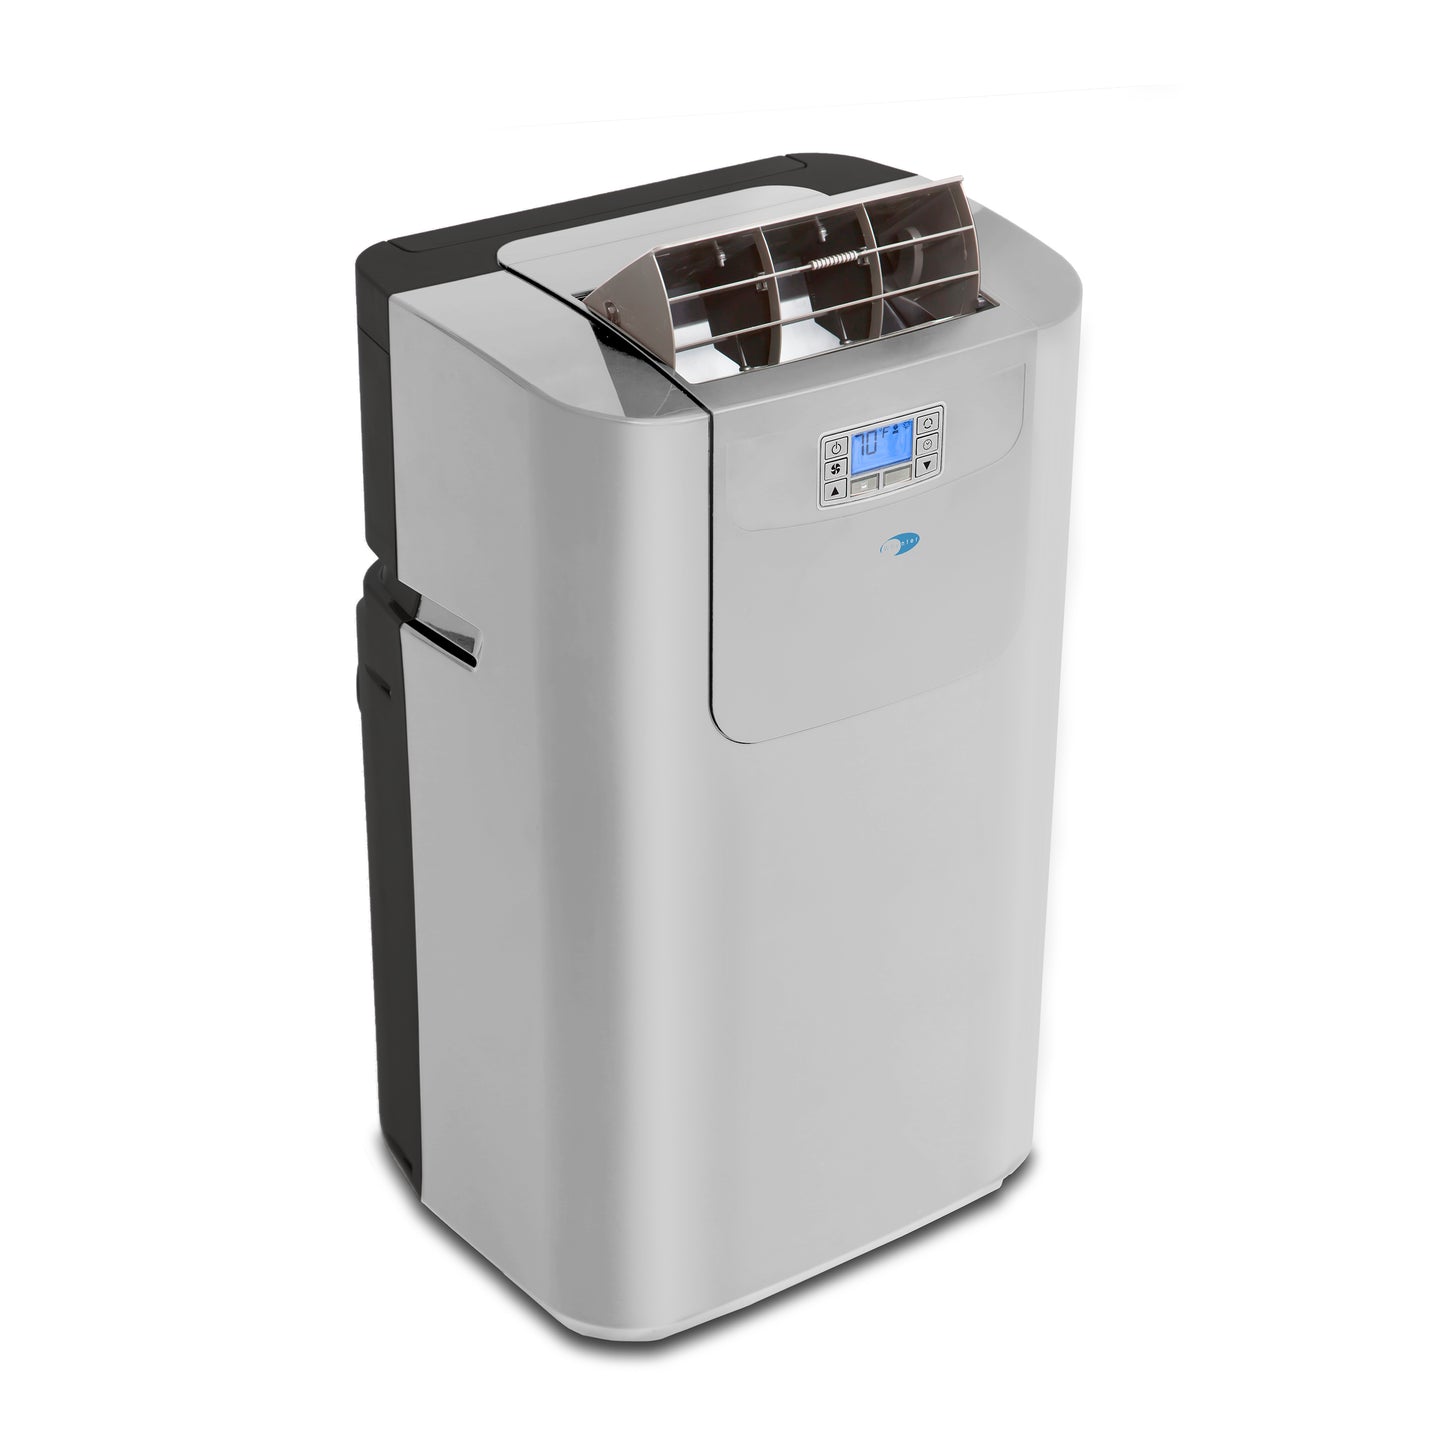 Buy a Whynter Elite 12000 BTU 400 sq ft Dual Hose Digital Portable Air Conditioner with Heat and Drain Pump by Chilled Beverages